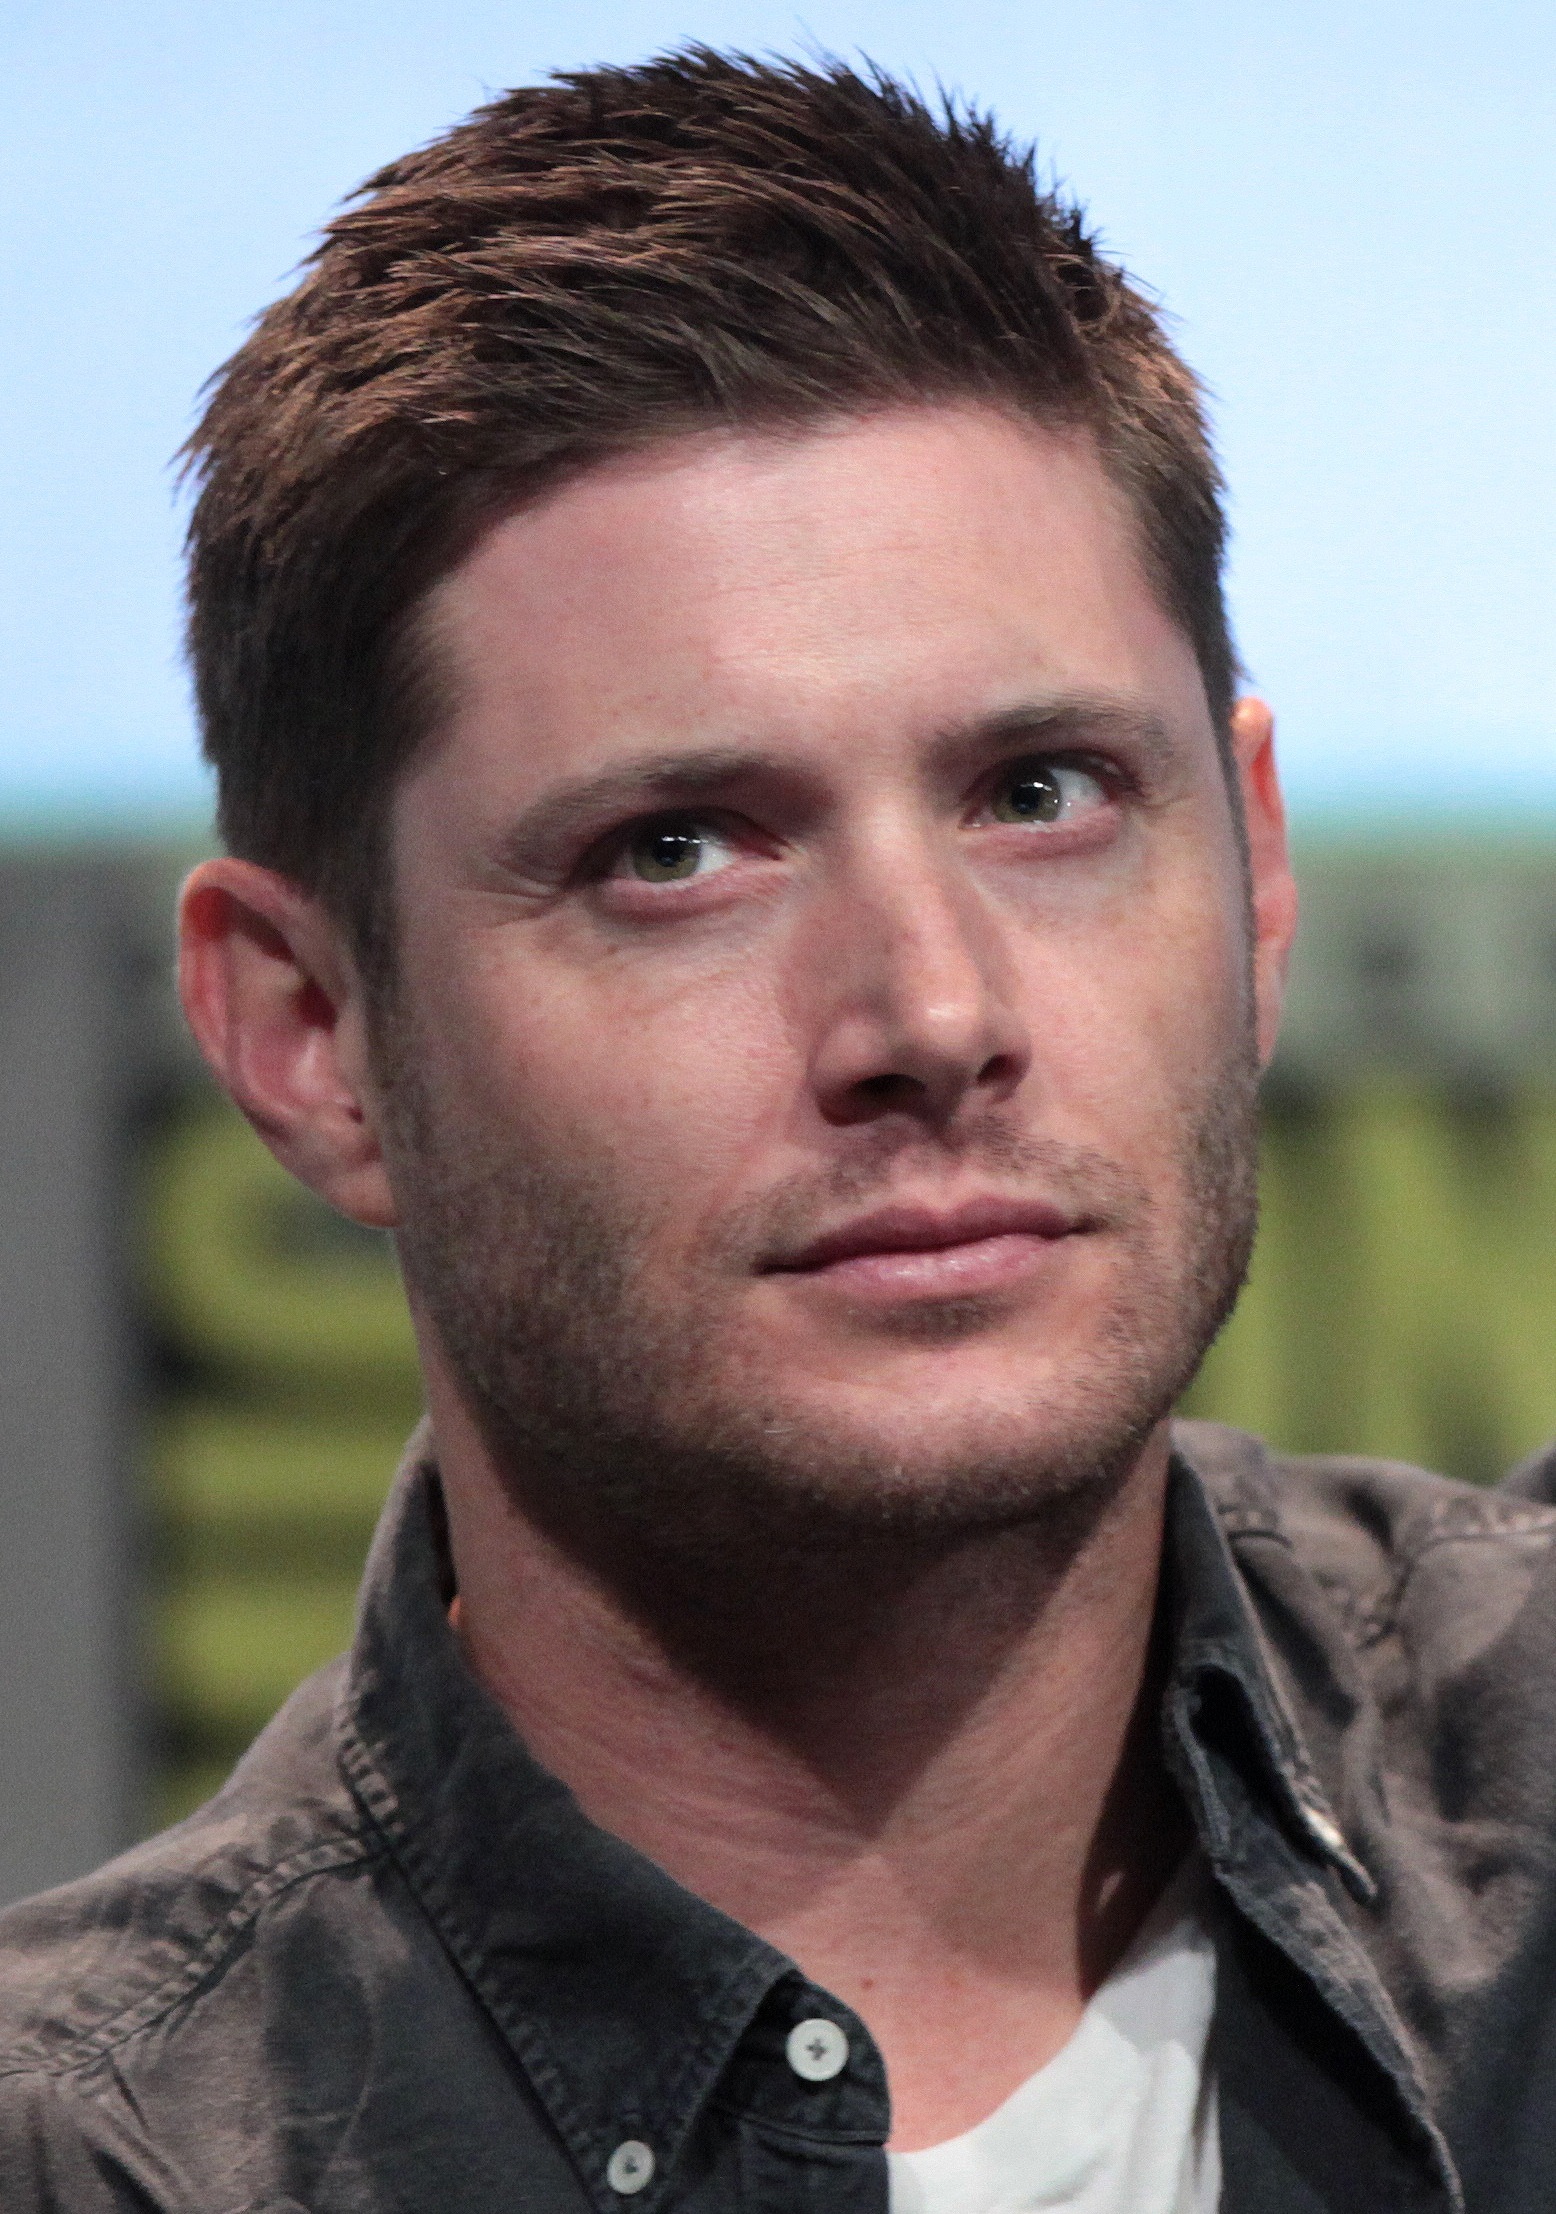 images-of-jay-w-jensen